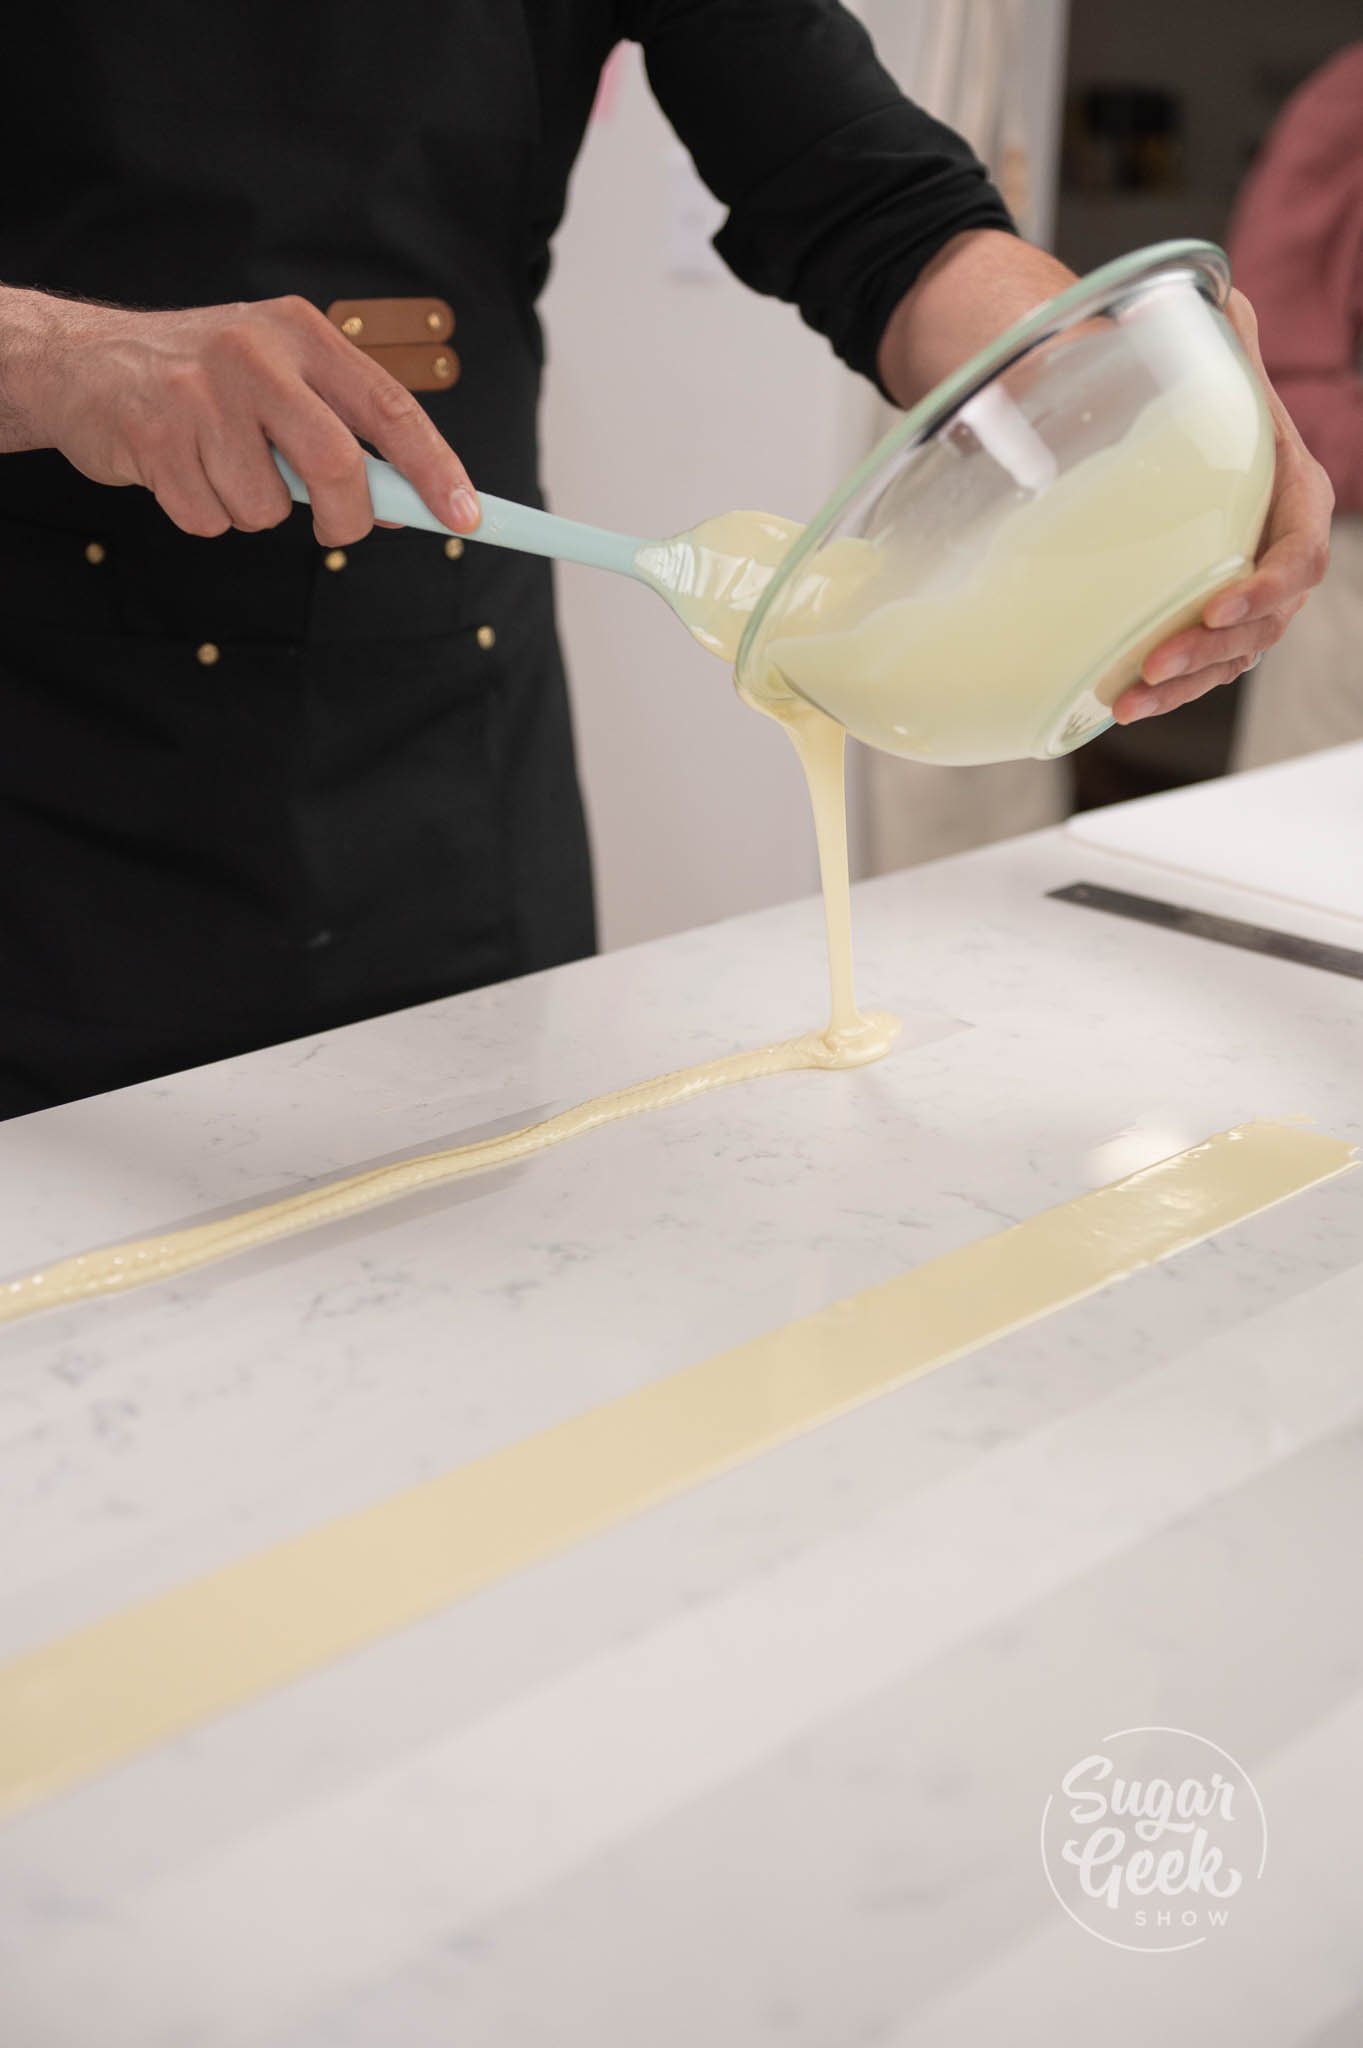 hand pouring bowl of white chocolate onto acetate sheets.